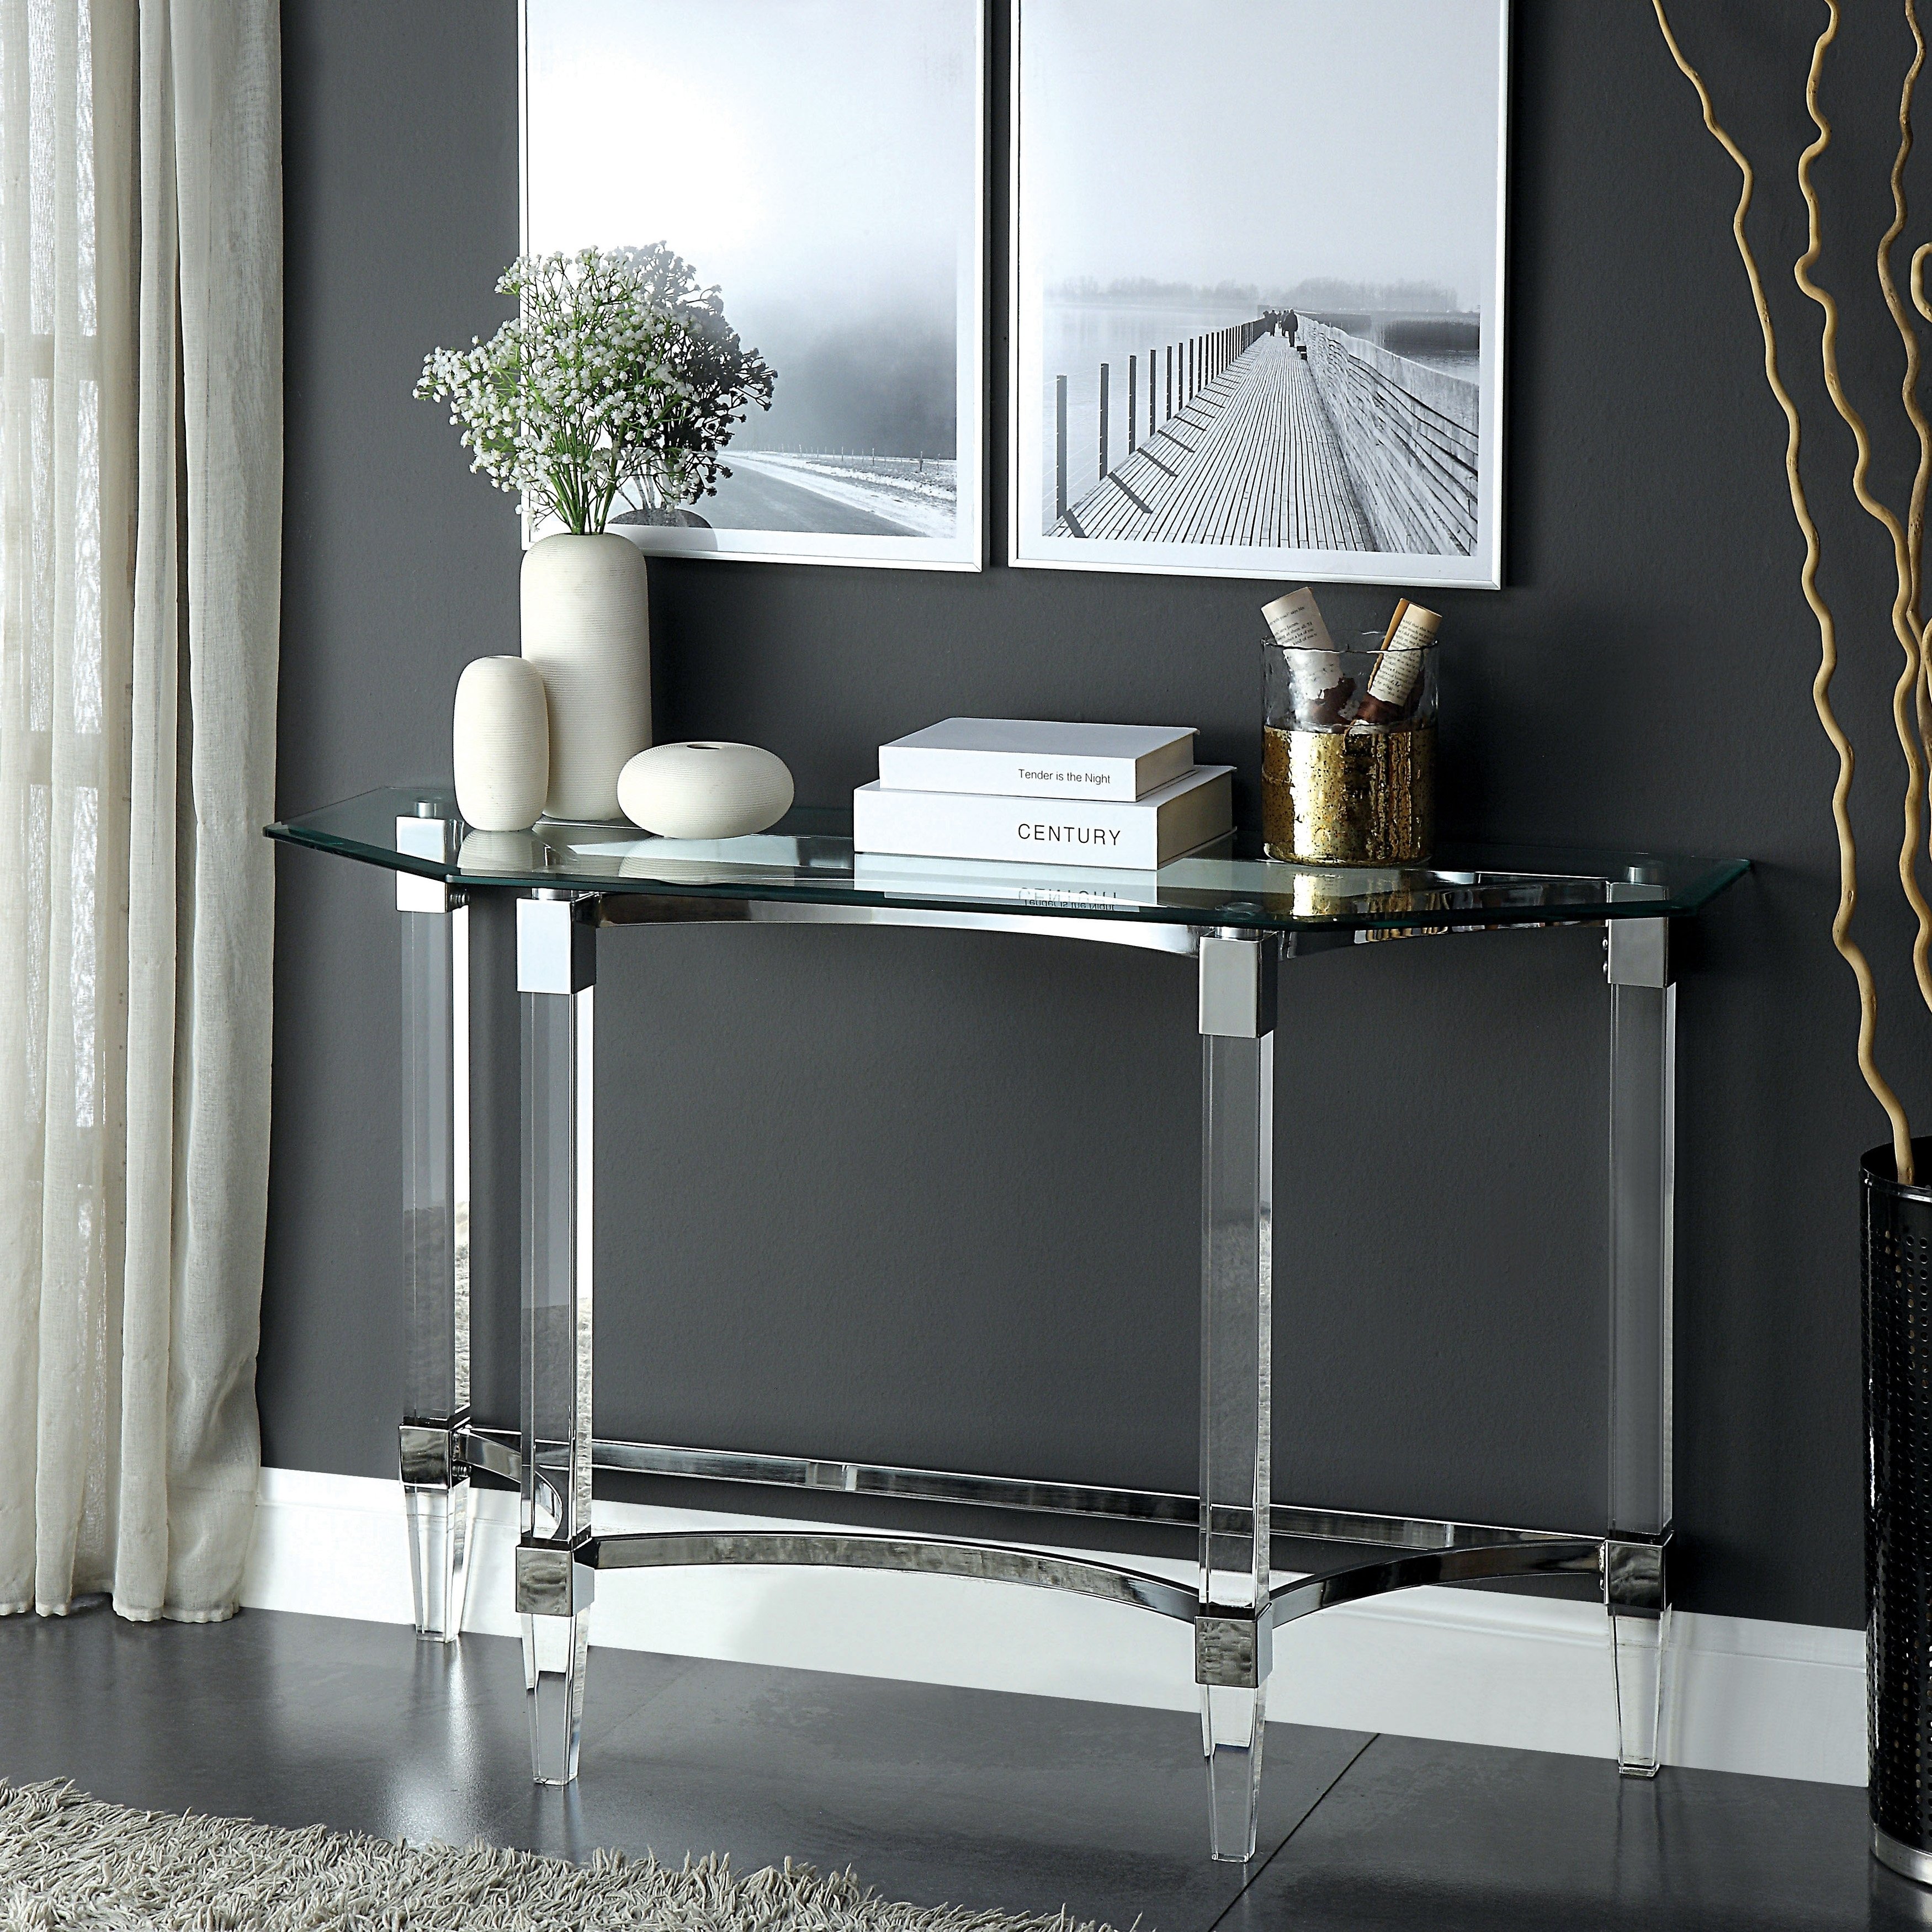 furniture america matisse glass chrome console table free metal accent sofa with shelf shipping today small living room decorating ideas party decorations battery operated lights